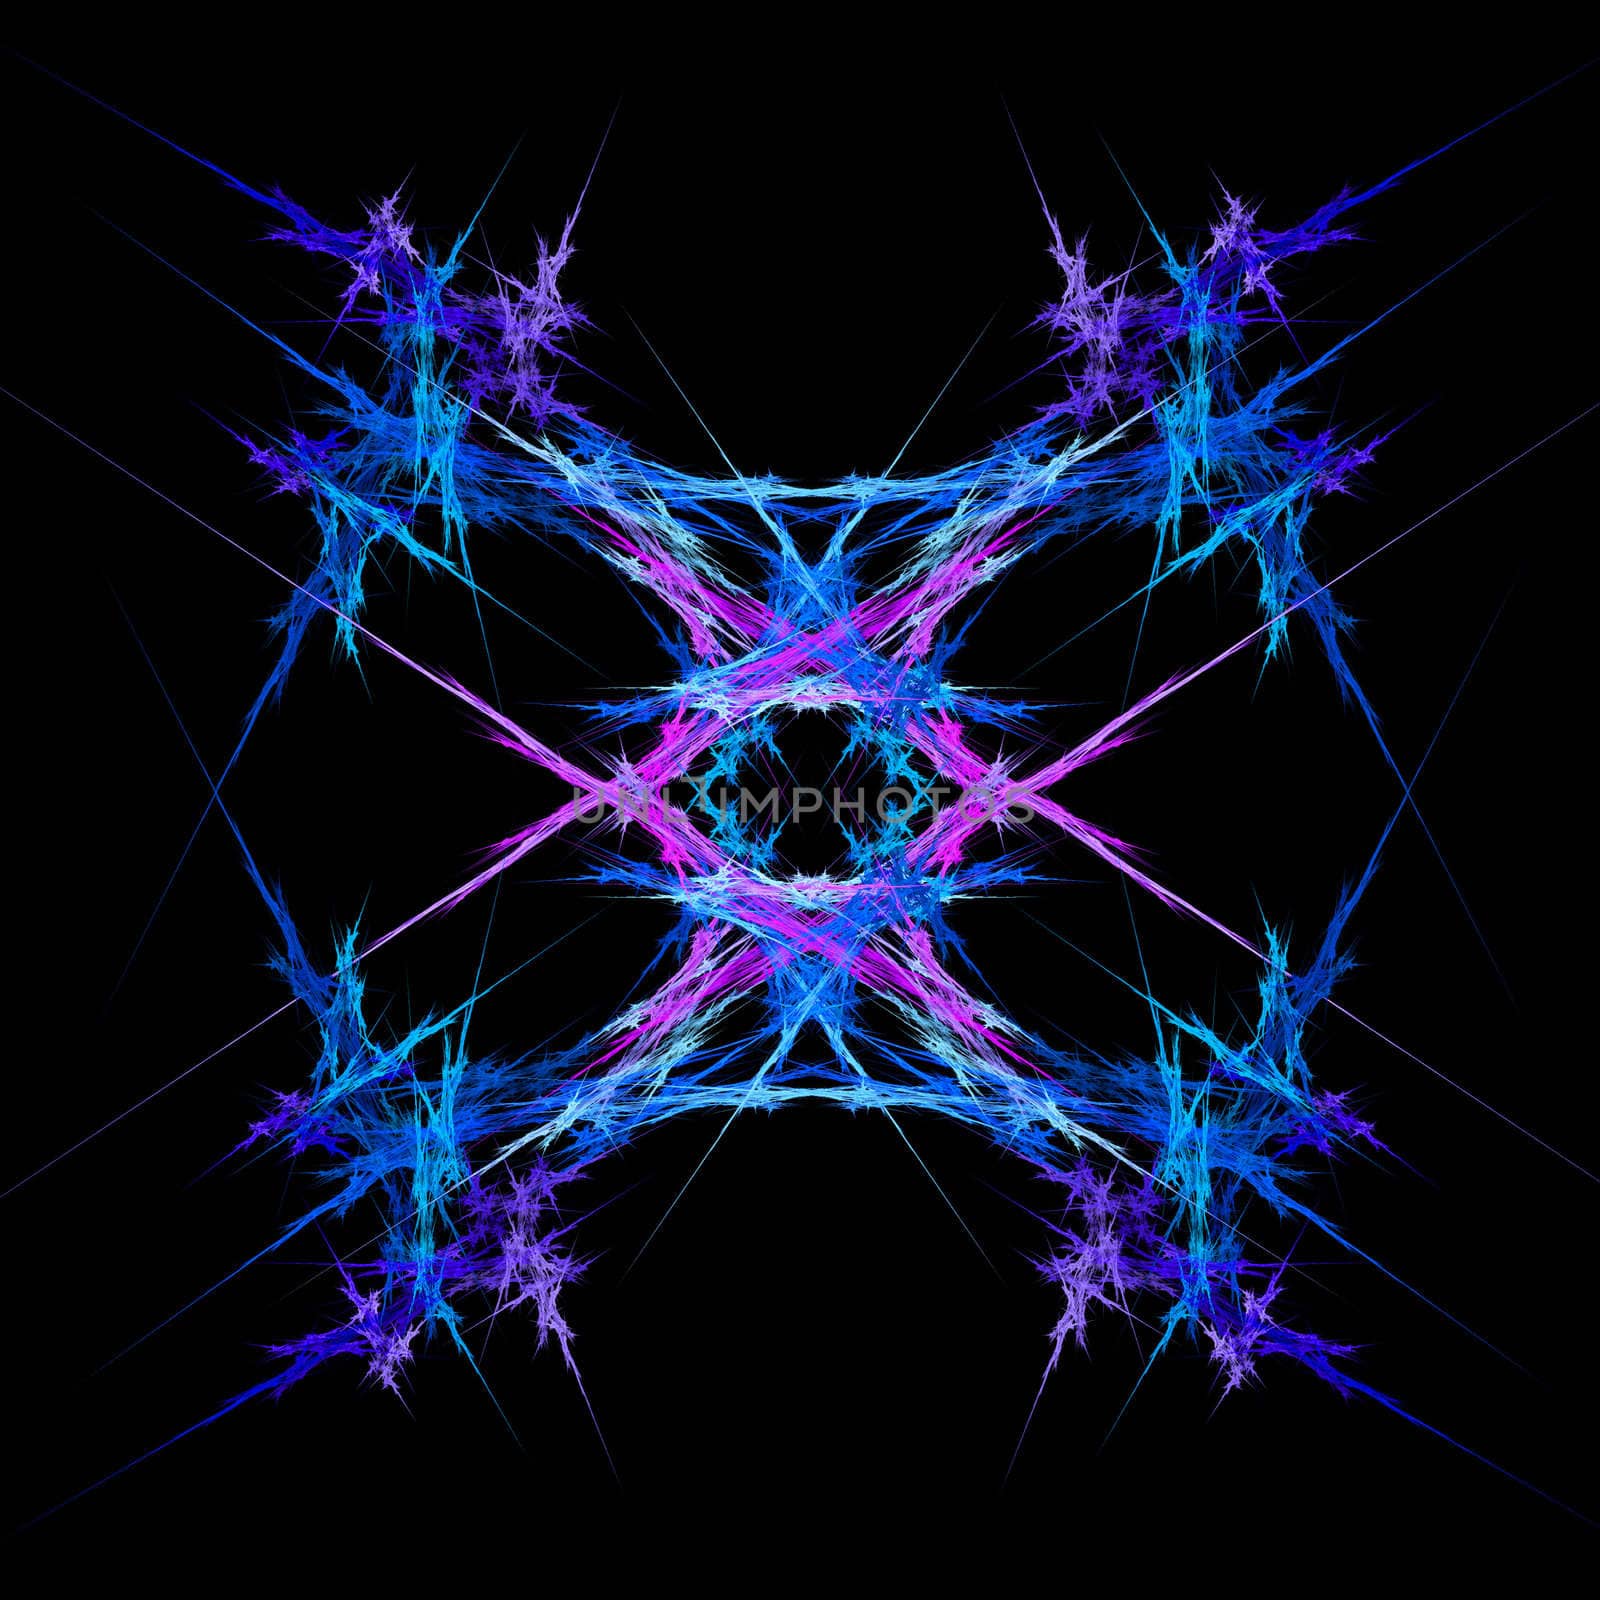 Abstract Symmetrical Fractal Background by mhprice